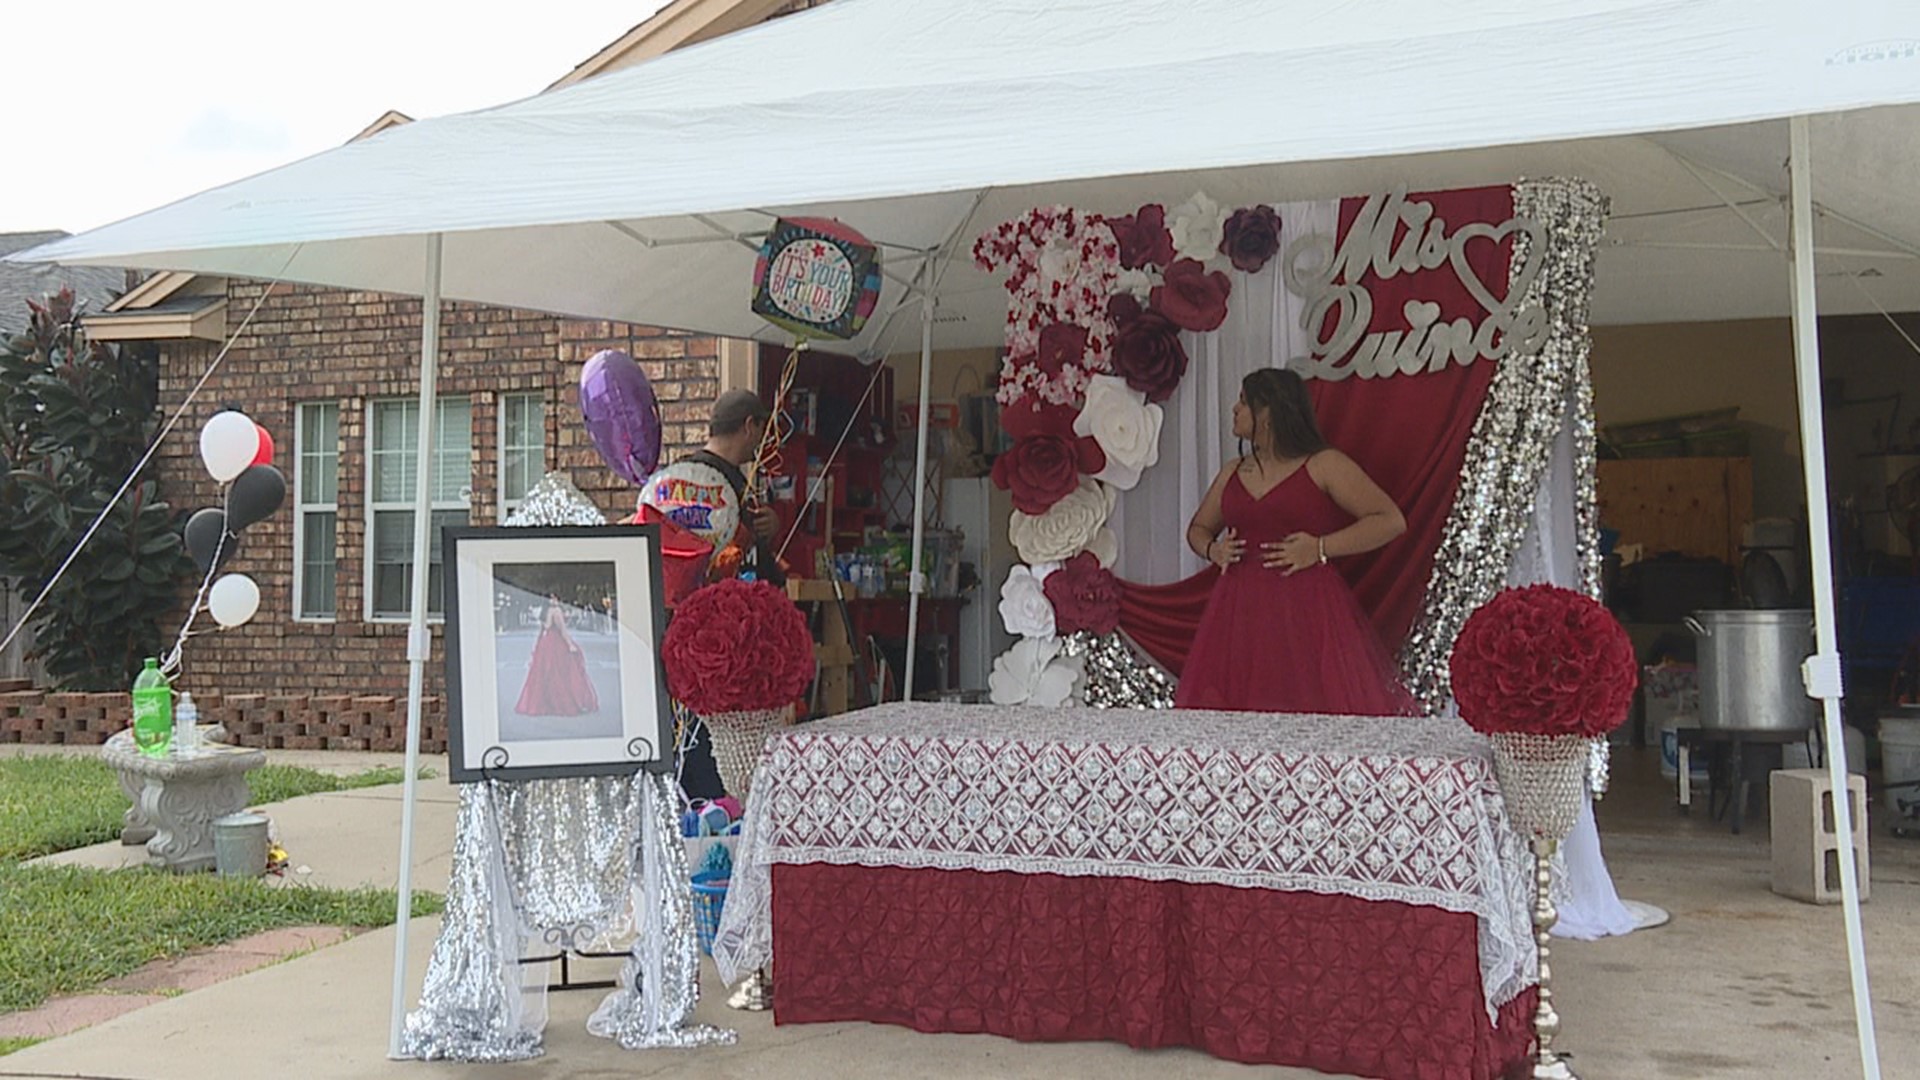 One local family has been preparing to celebrate Isabella Hernandez's quince for over a year, but the pandemic forced them to modify those plans.